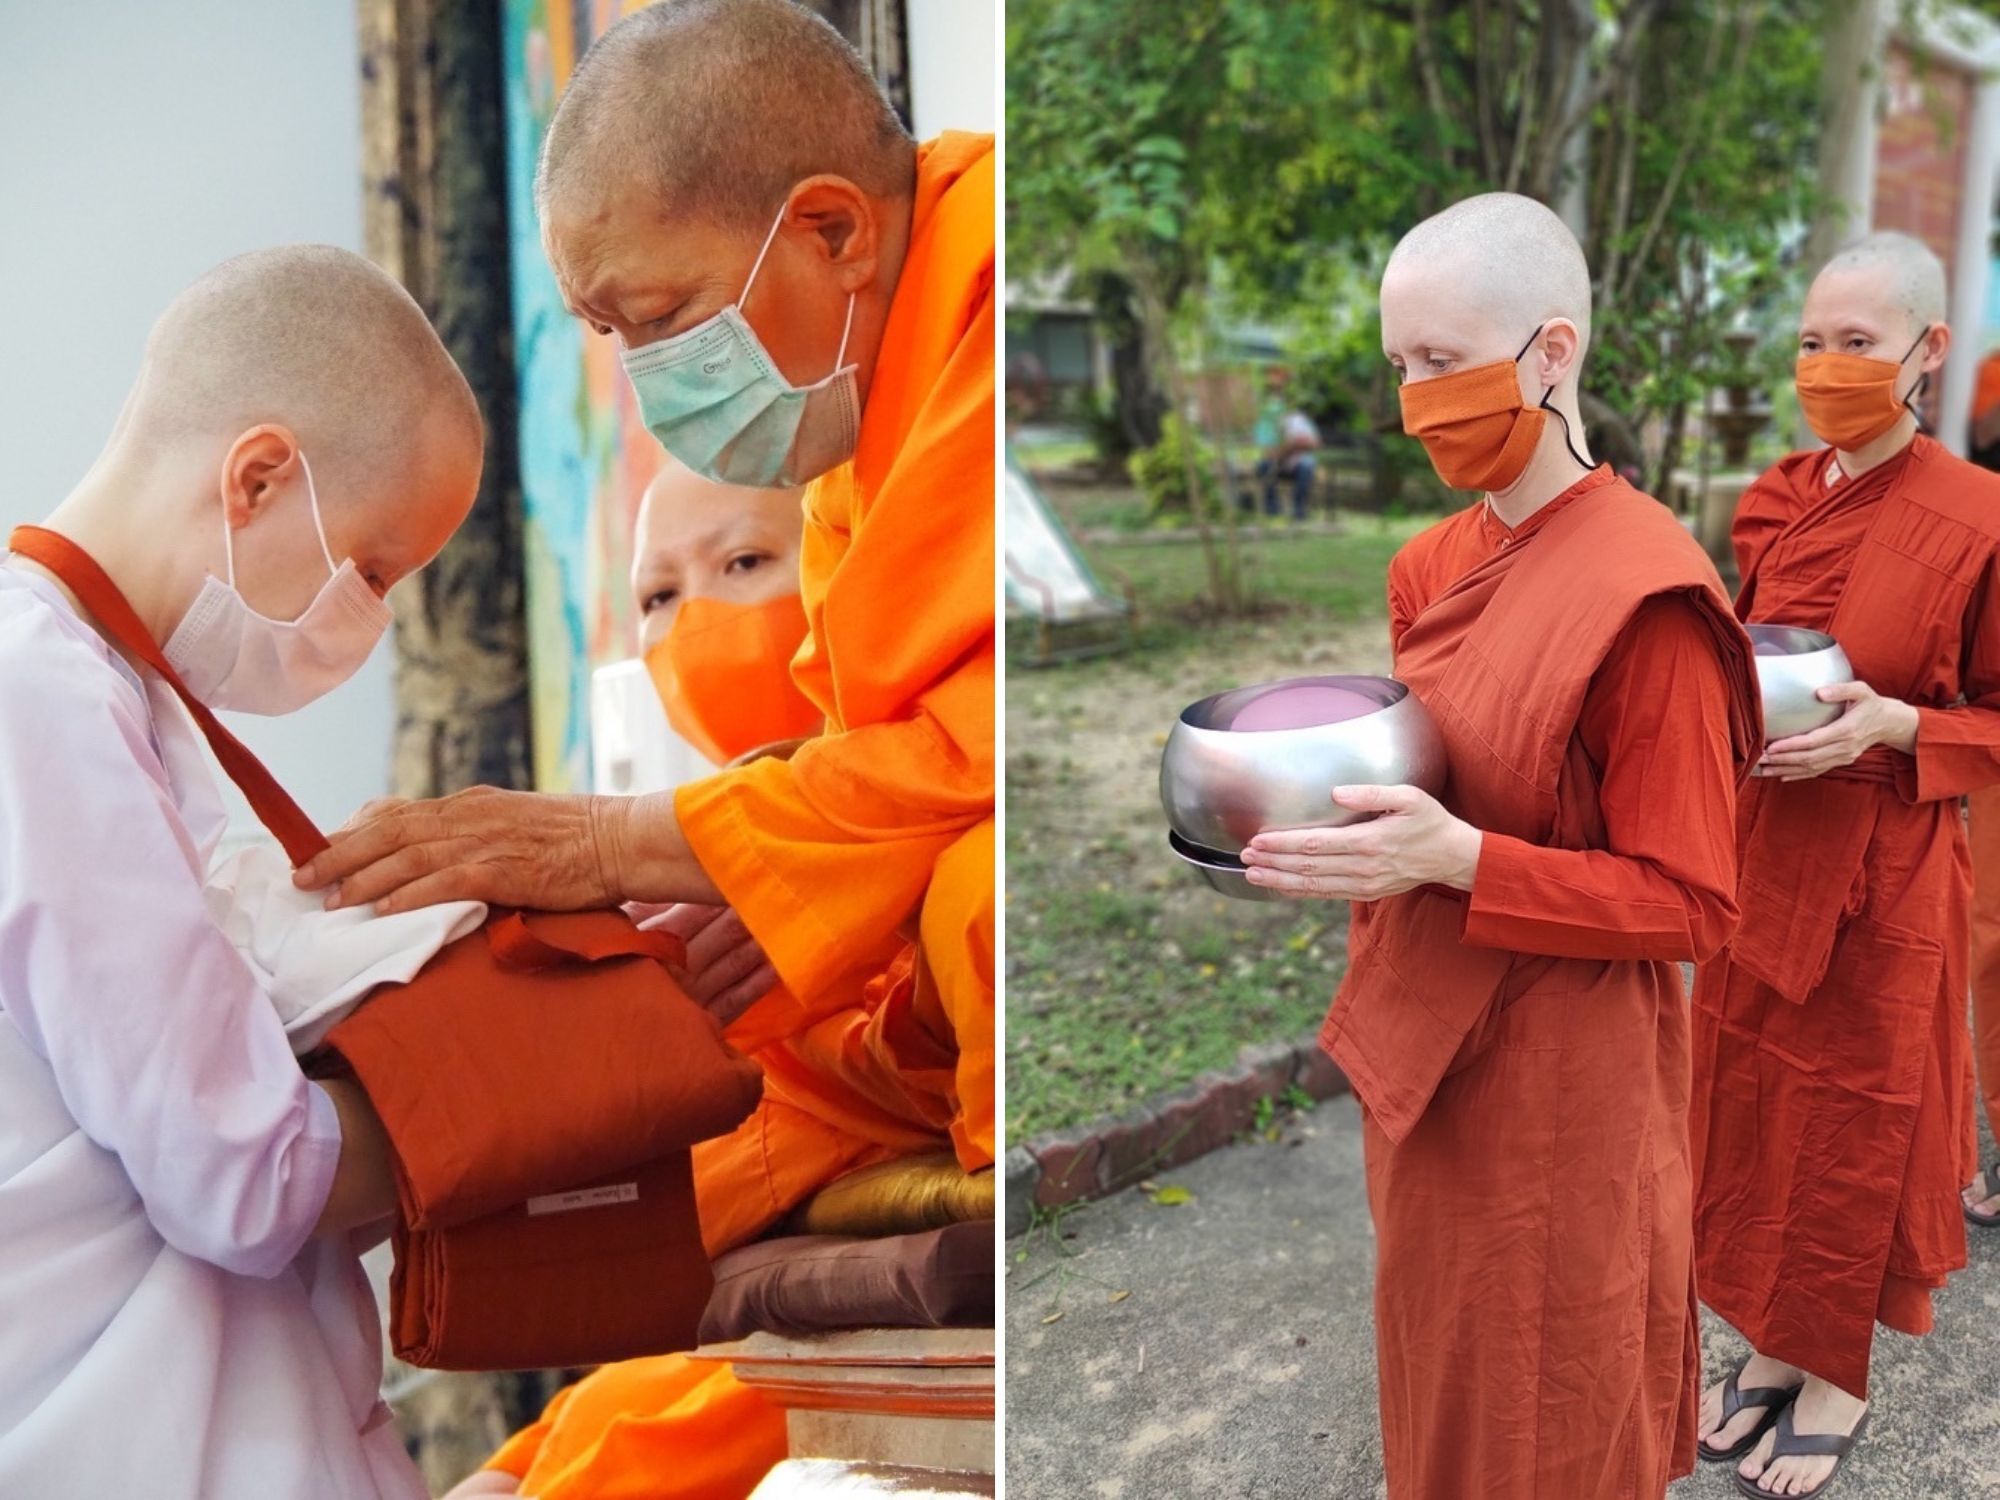 Two photos side by side show Katherine Scahill receiving orange monk robes from Venerable Dhammananda in a Thai Buddhist monastery for women. The second image shows Scahill wearing the orange robes, and orange face mask and carrying a metal bowl outdoors walking in a line.. 